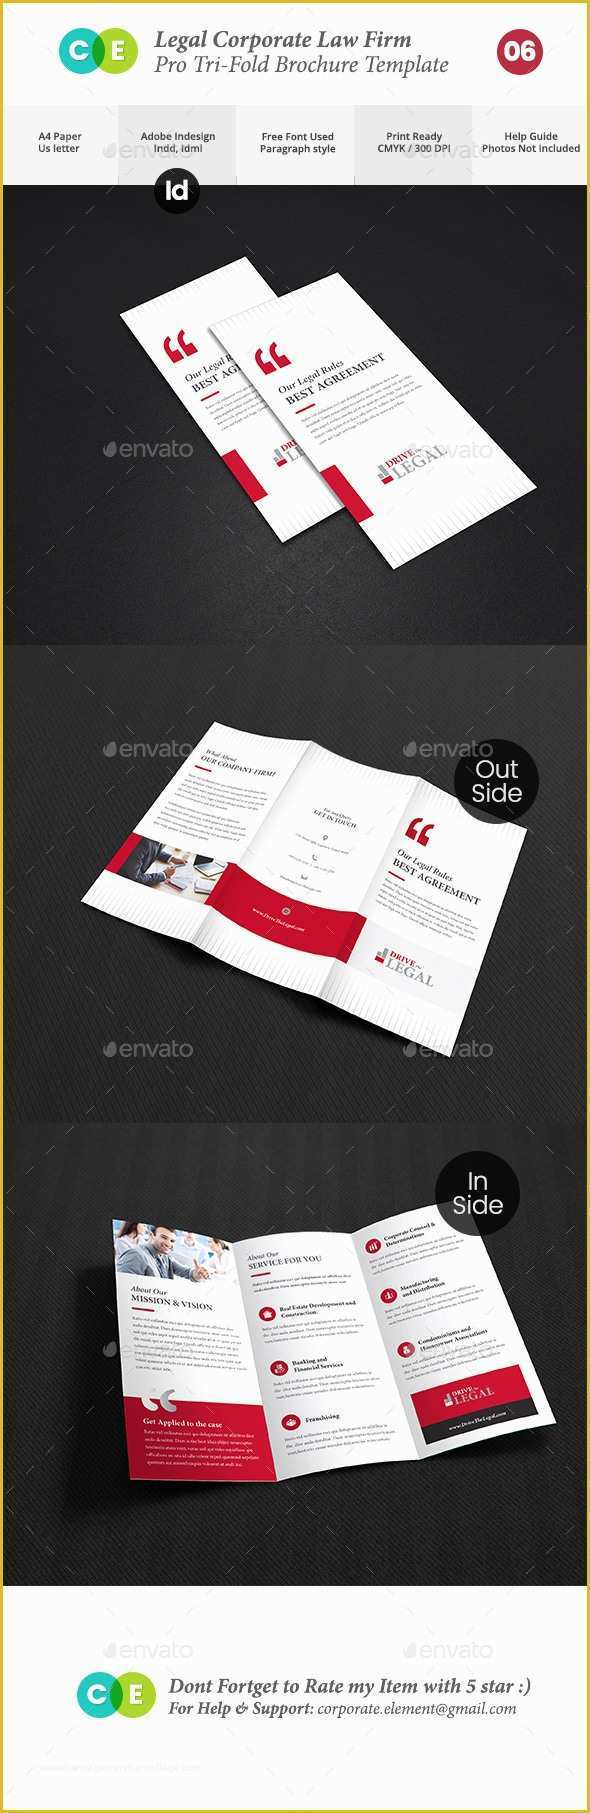 Free Legal Brochure Templates Of Legal Corporate Law Firm Business Tri Fold Brochure V06 by